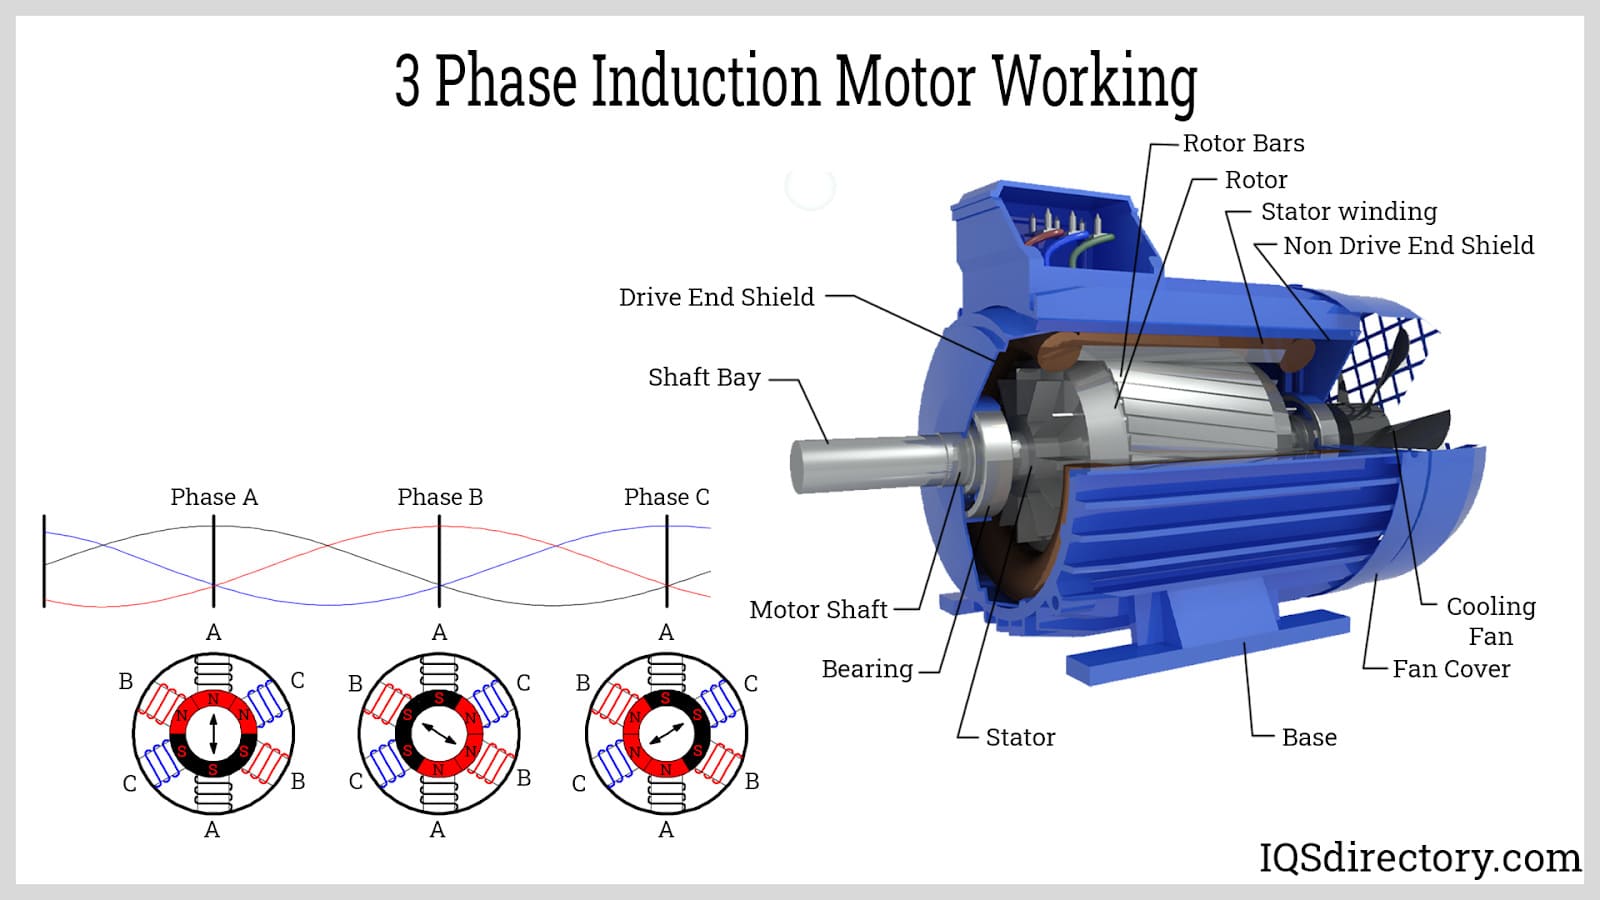 https://www.iqsdirectory.com/articles/electric-motor/3-phase-induction-motor-working.jpg